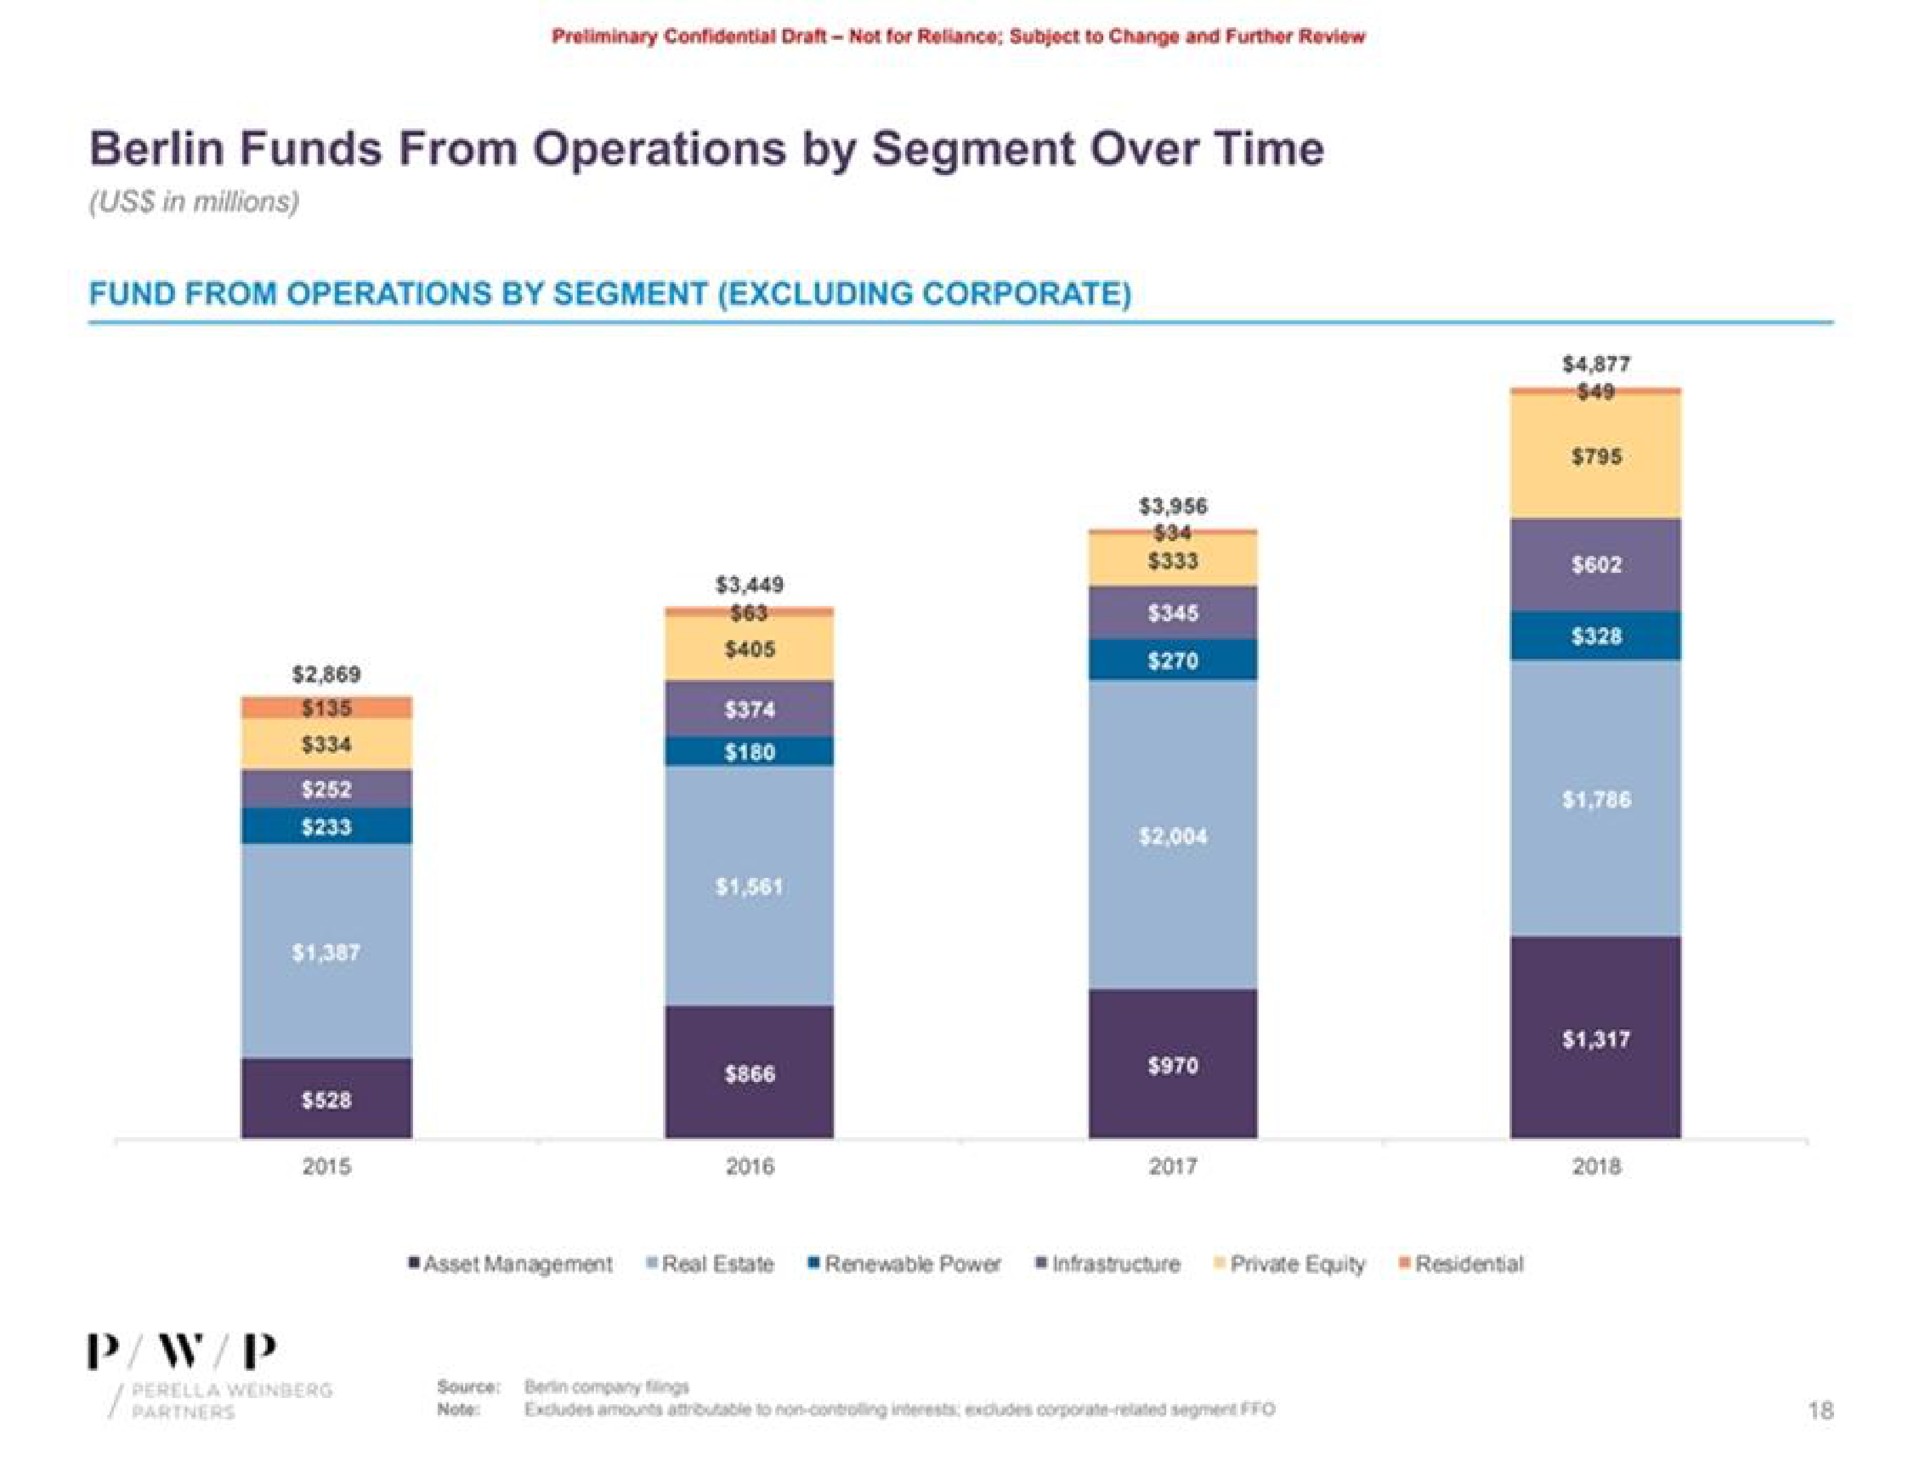 berlin funds from operations by segment over time fund from operations by segment excluding corporate | Perella Weinberg Partners